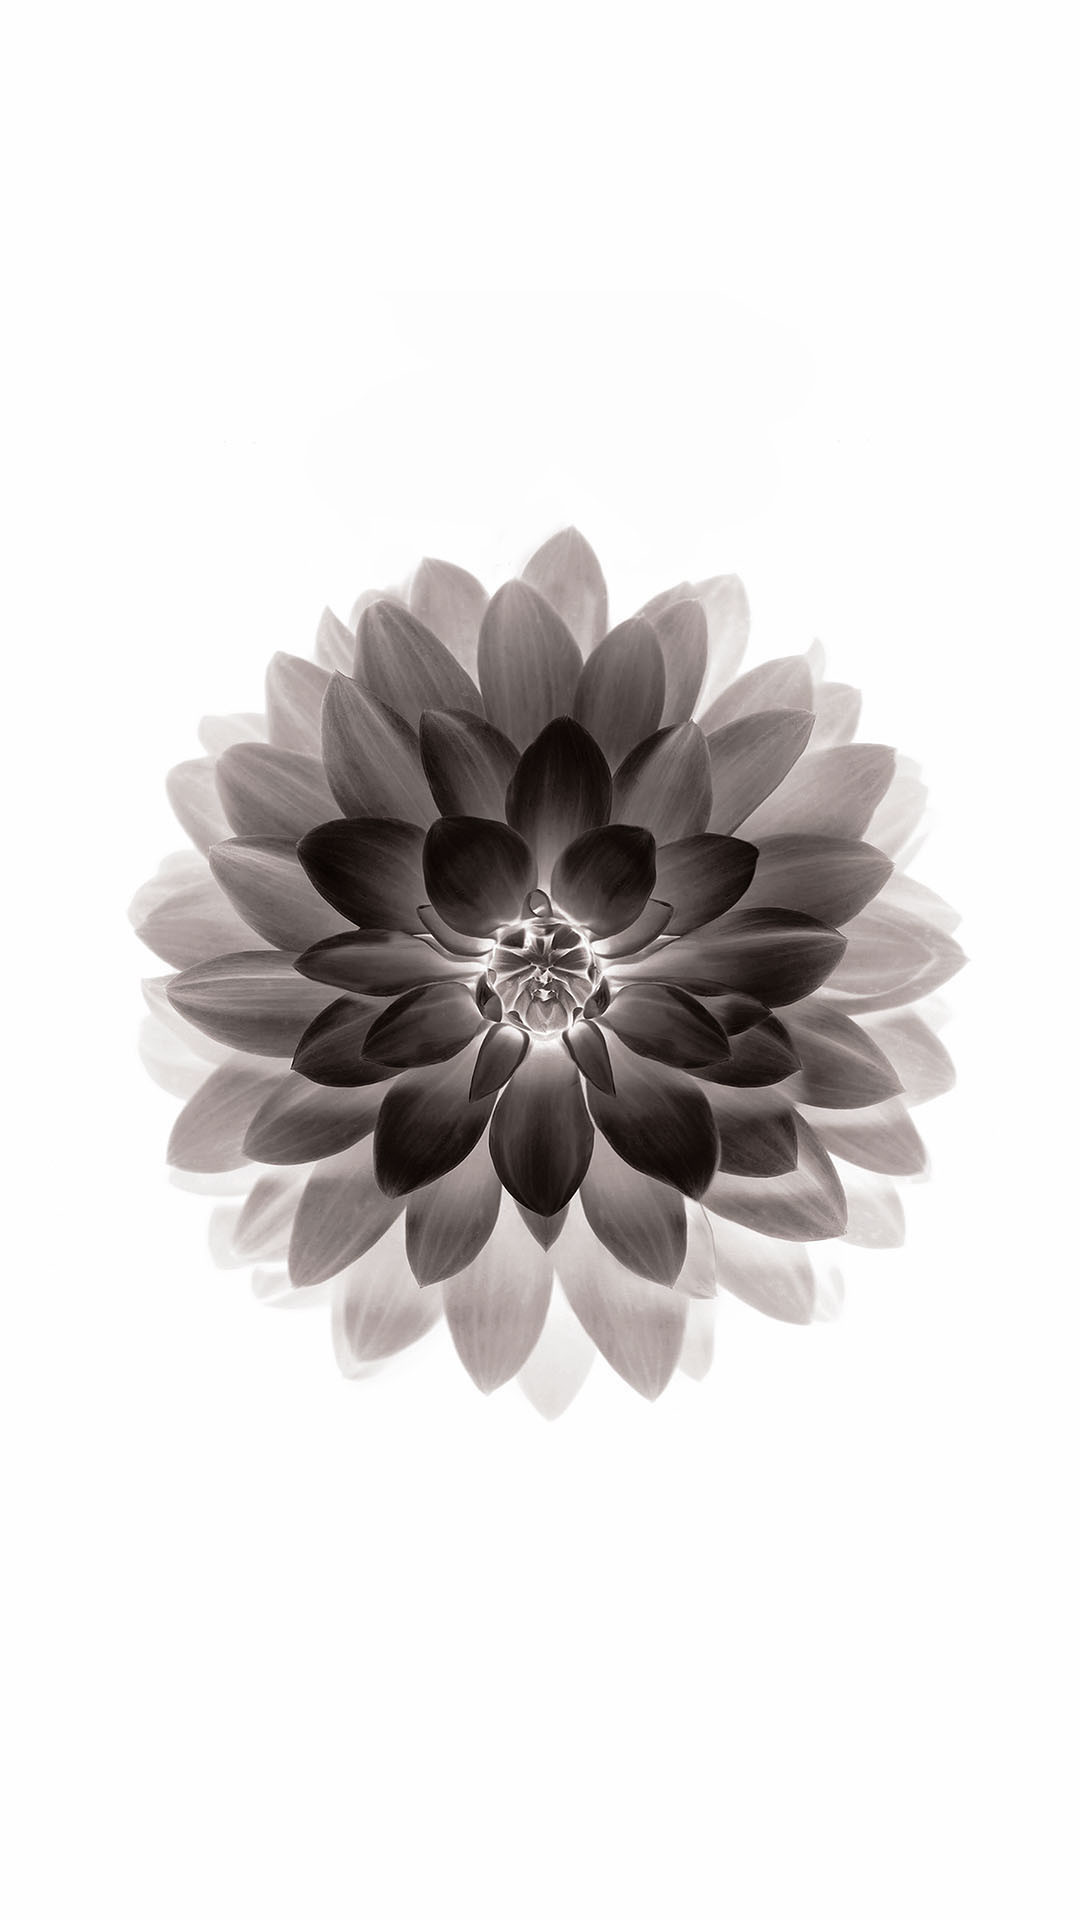 1080x1920 Infrared Apple Lotus Flower Android Wallpaper ...